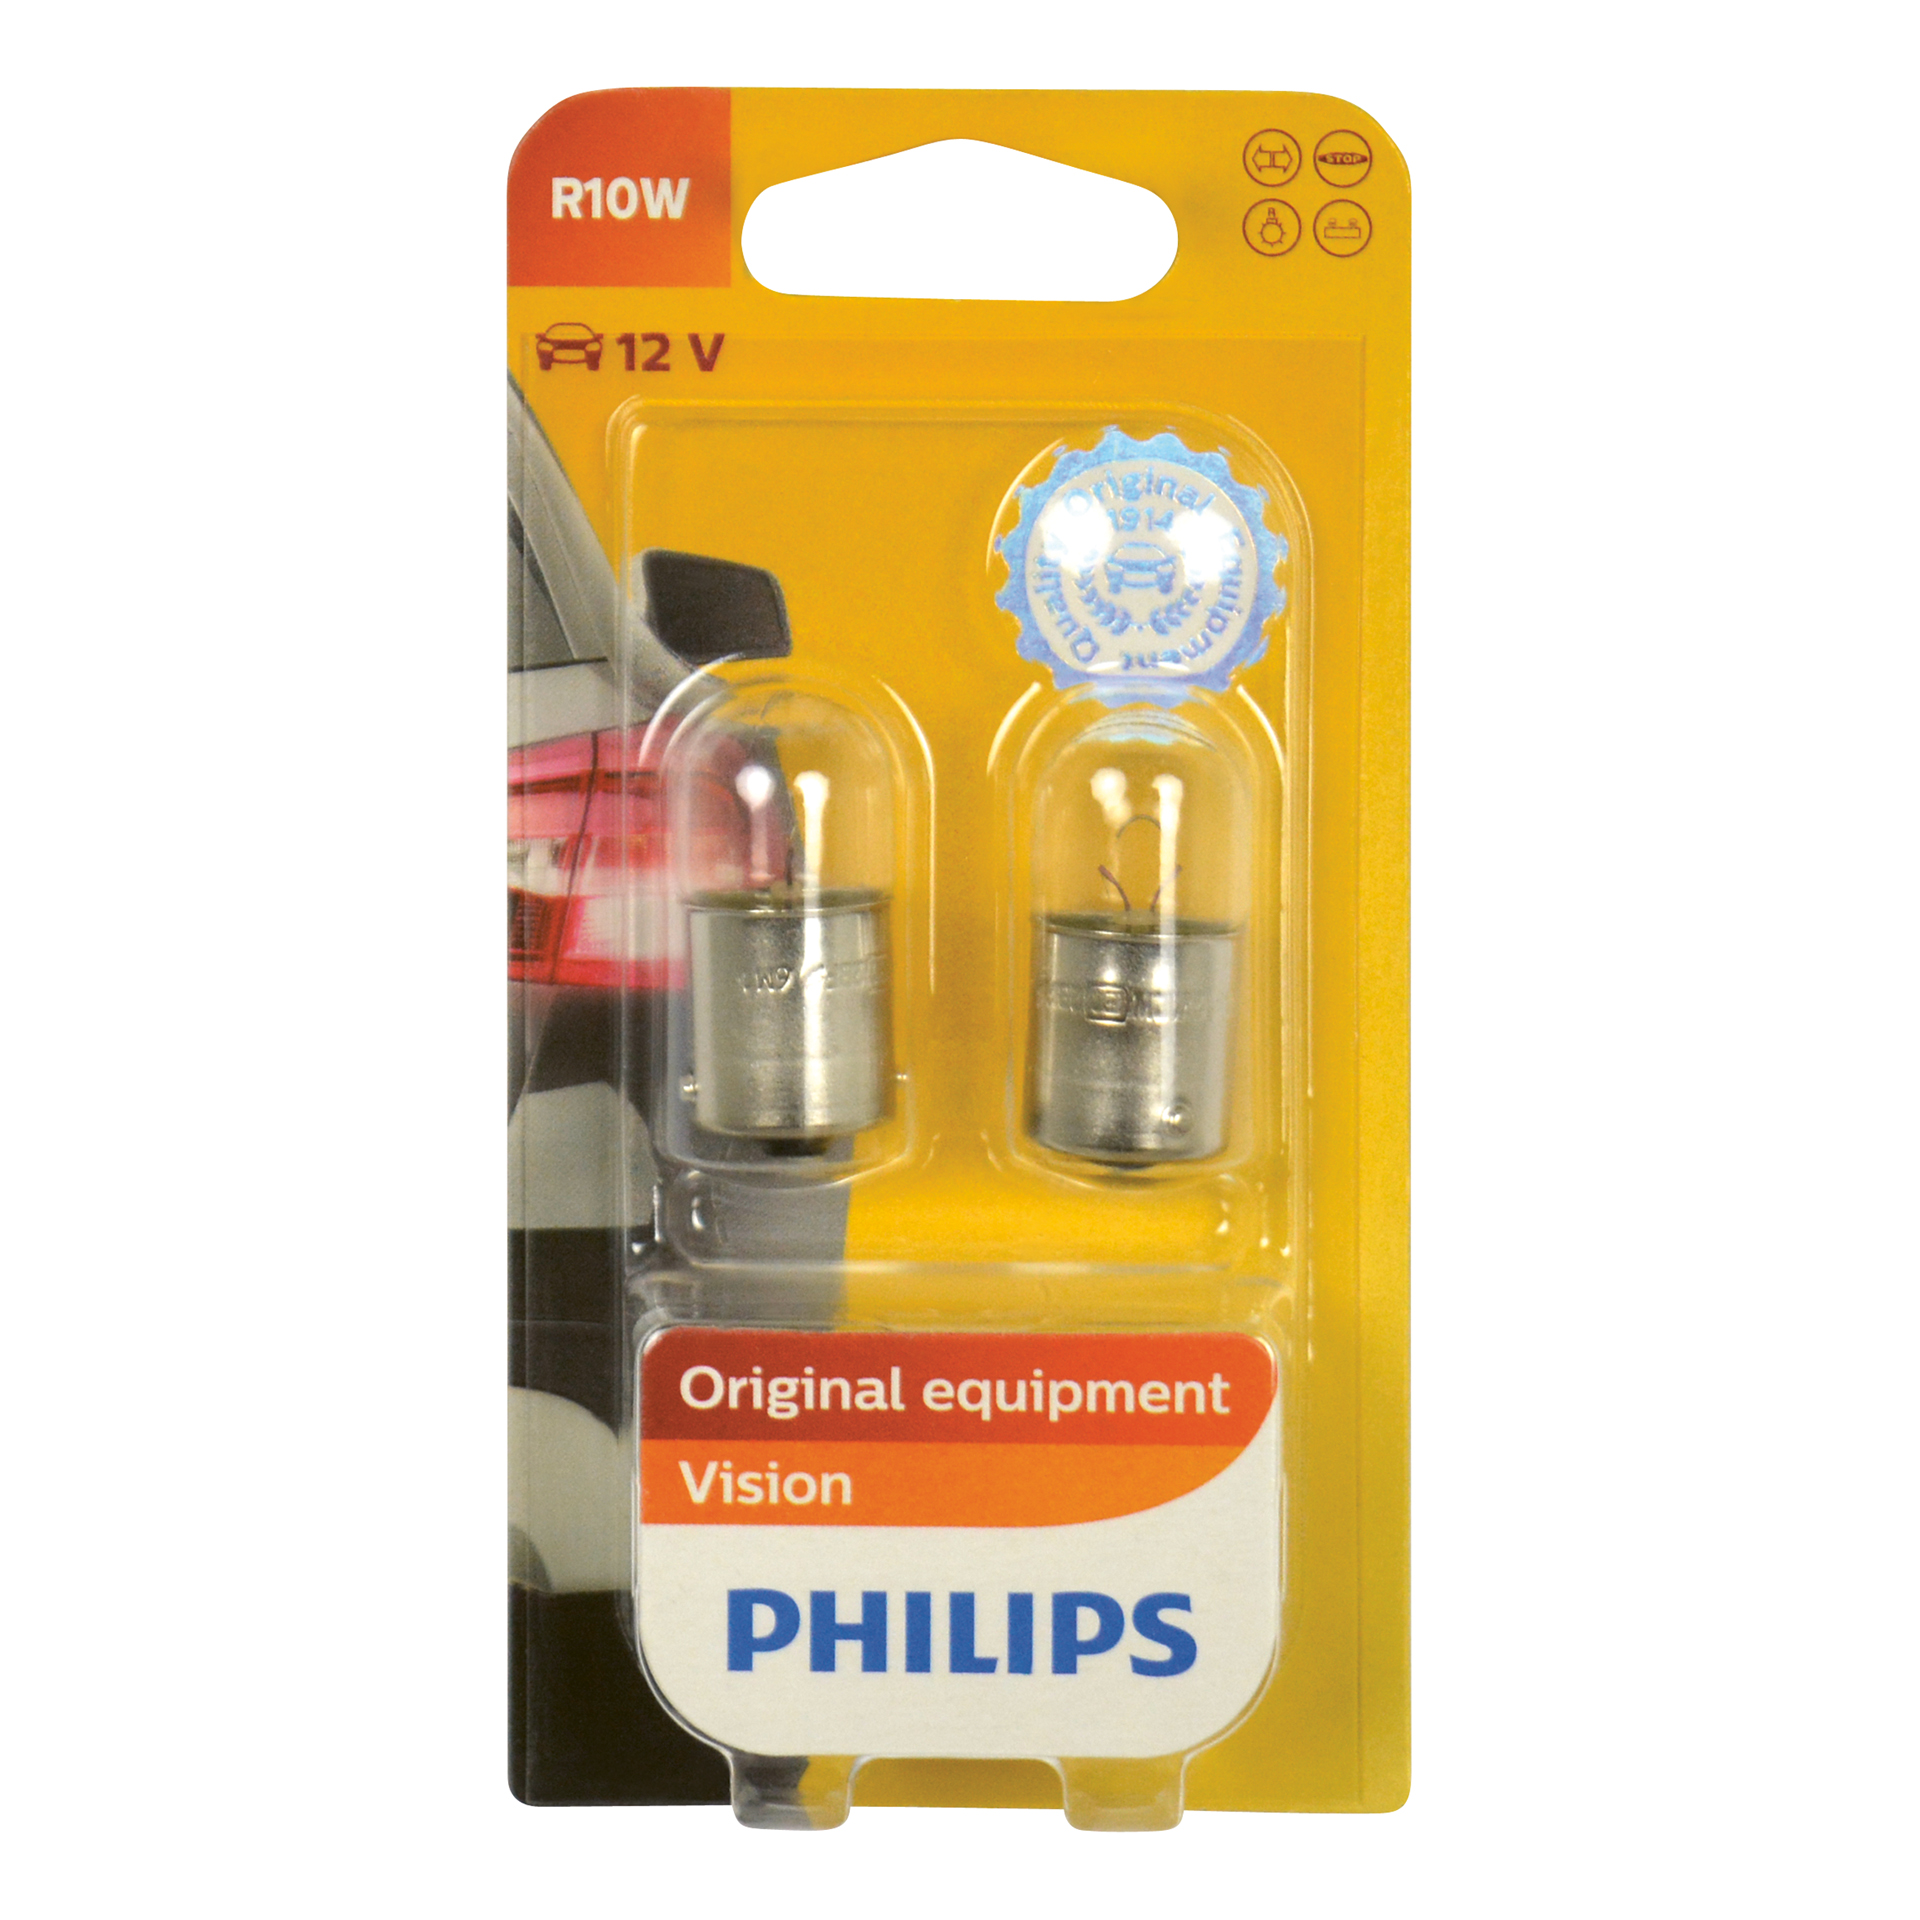 Philips Philips 12814B2 R10W Vision 0730017